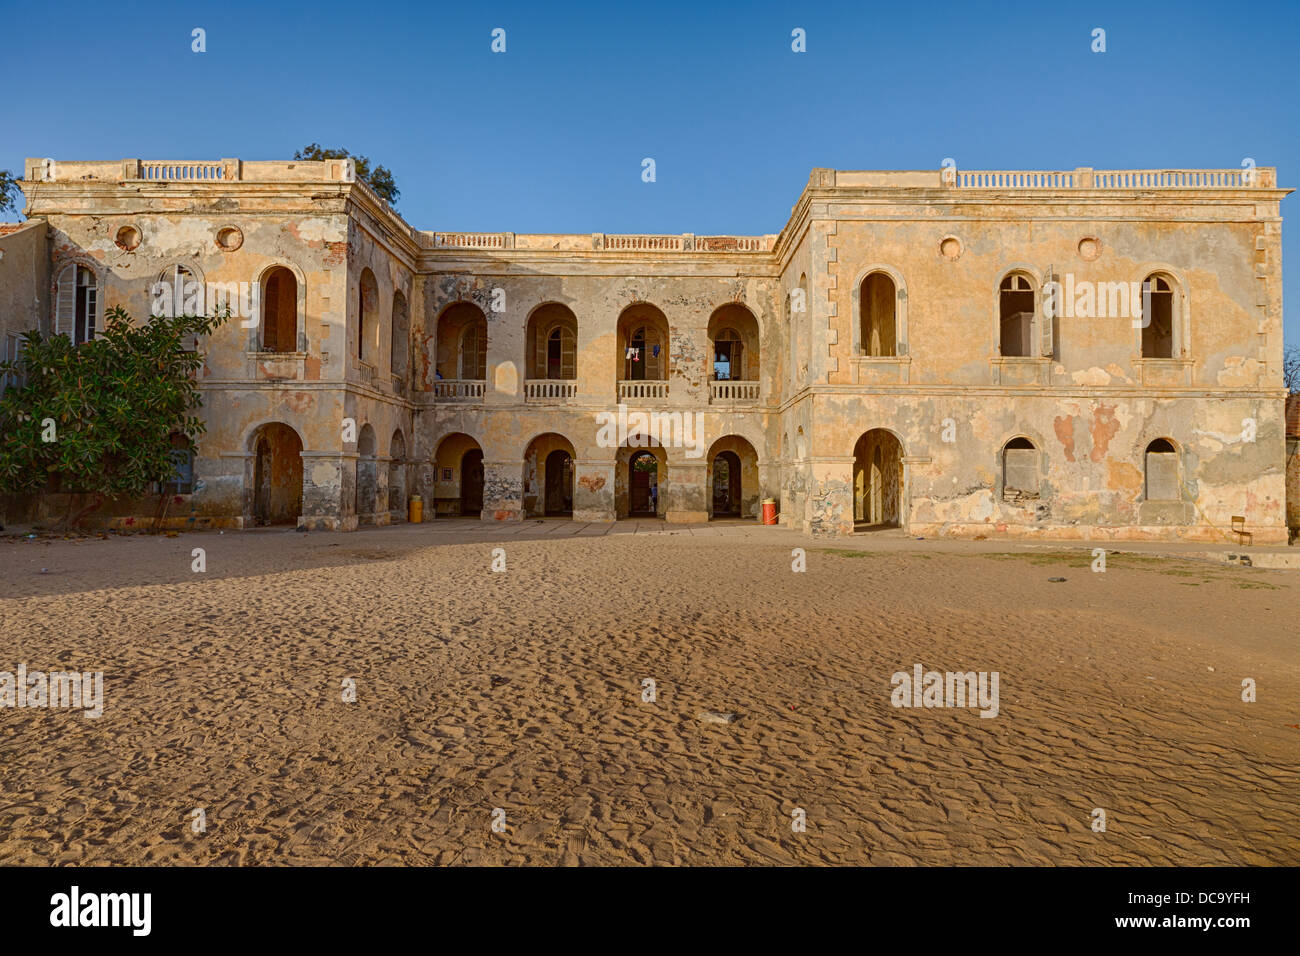 Abandoned French Colonial Governor's Residence, Goree Island, Senegal. Stock Photo